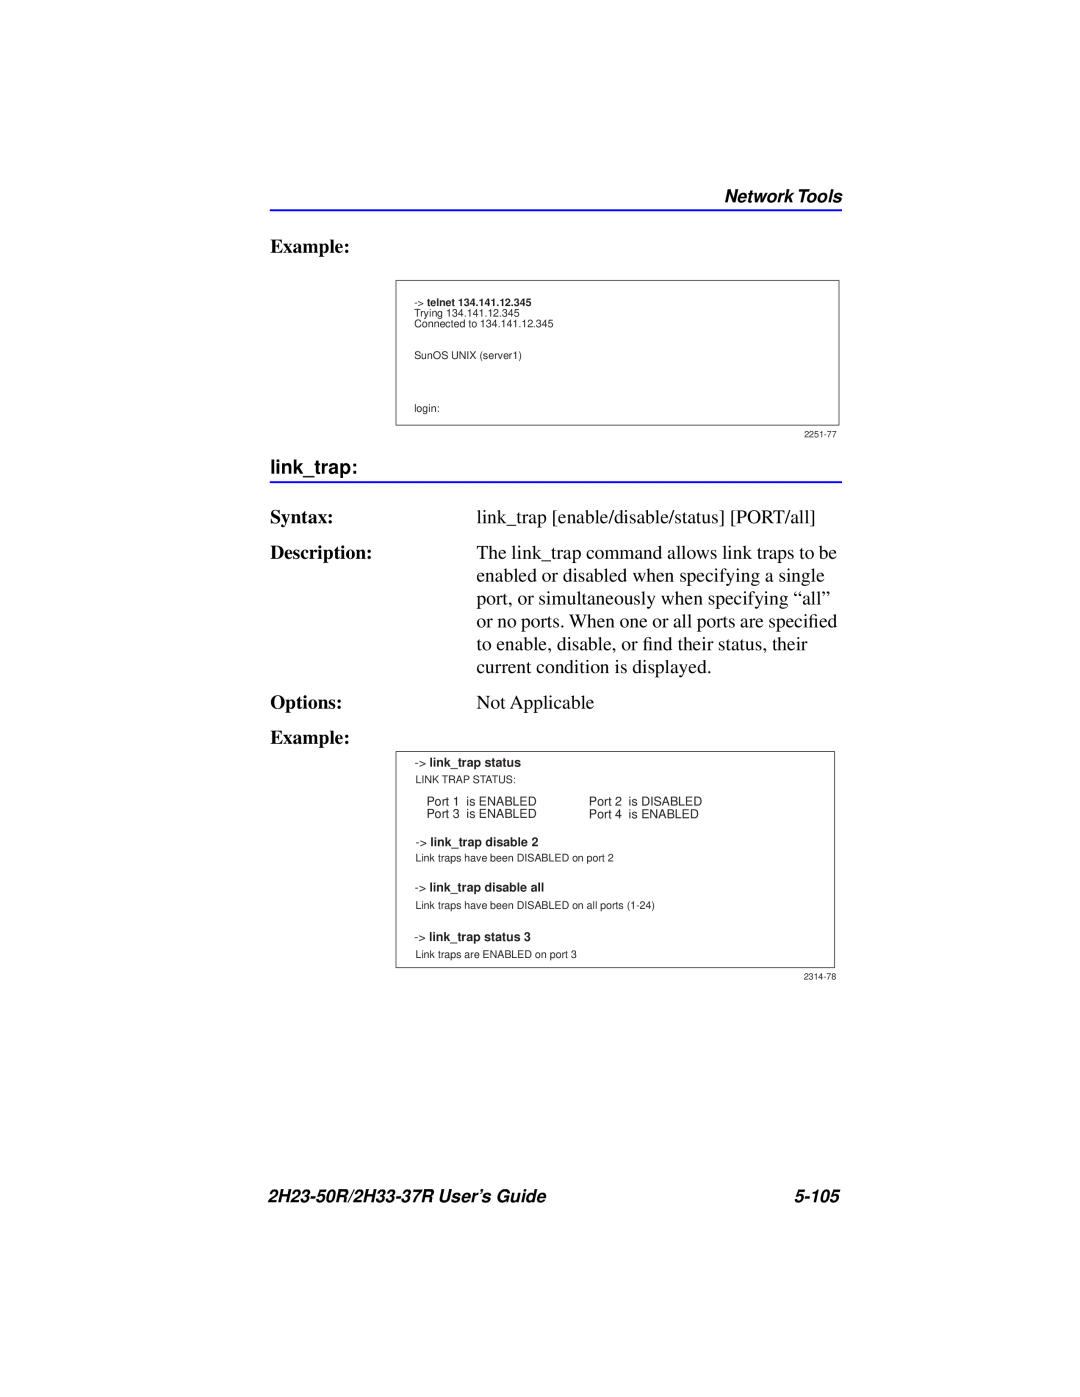 Cabletron Systems 2H23-50R, 2H33-37R manual Example, linktrap, Syntax, Description, Options 